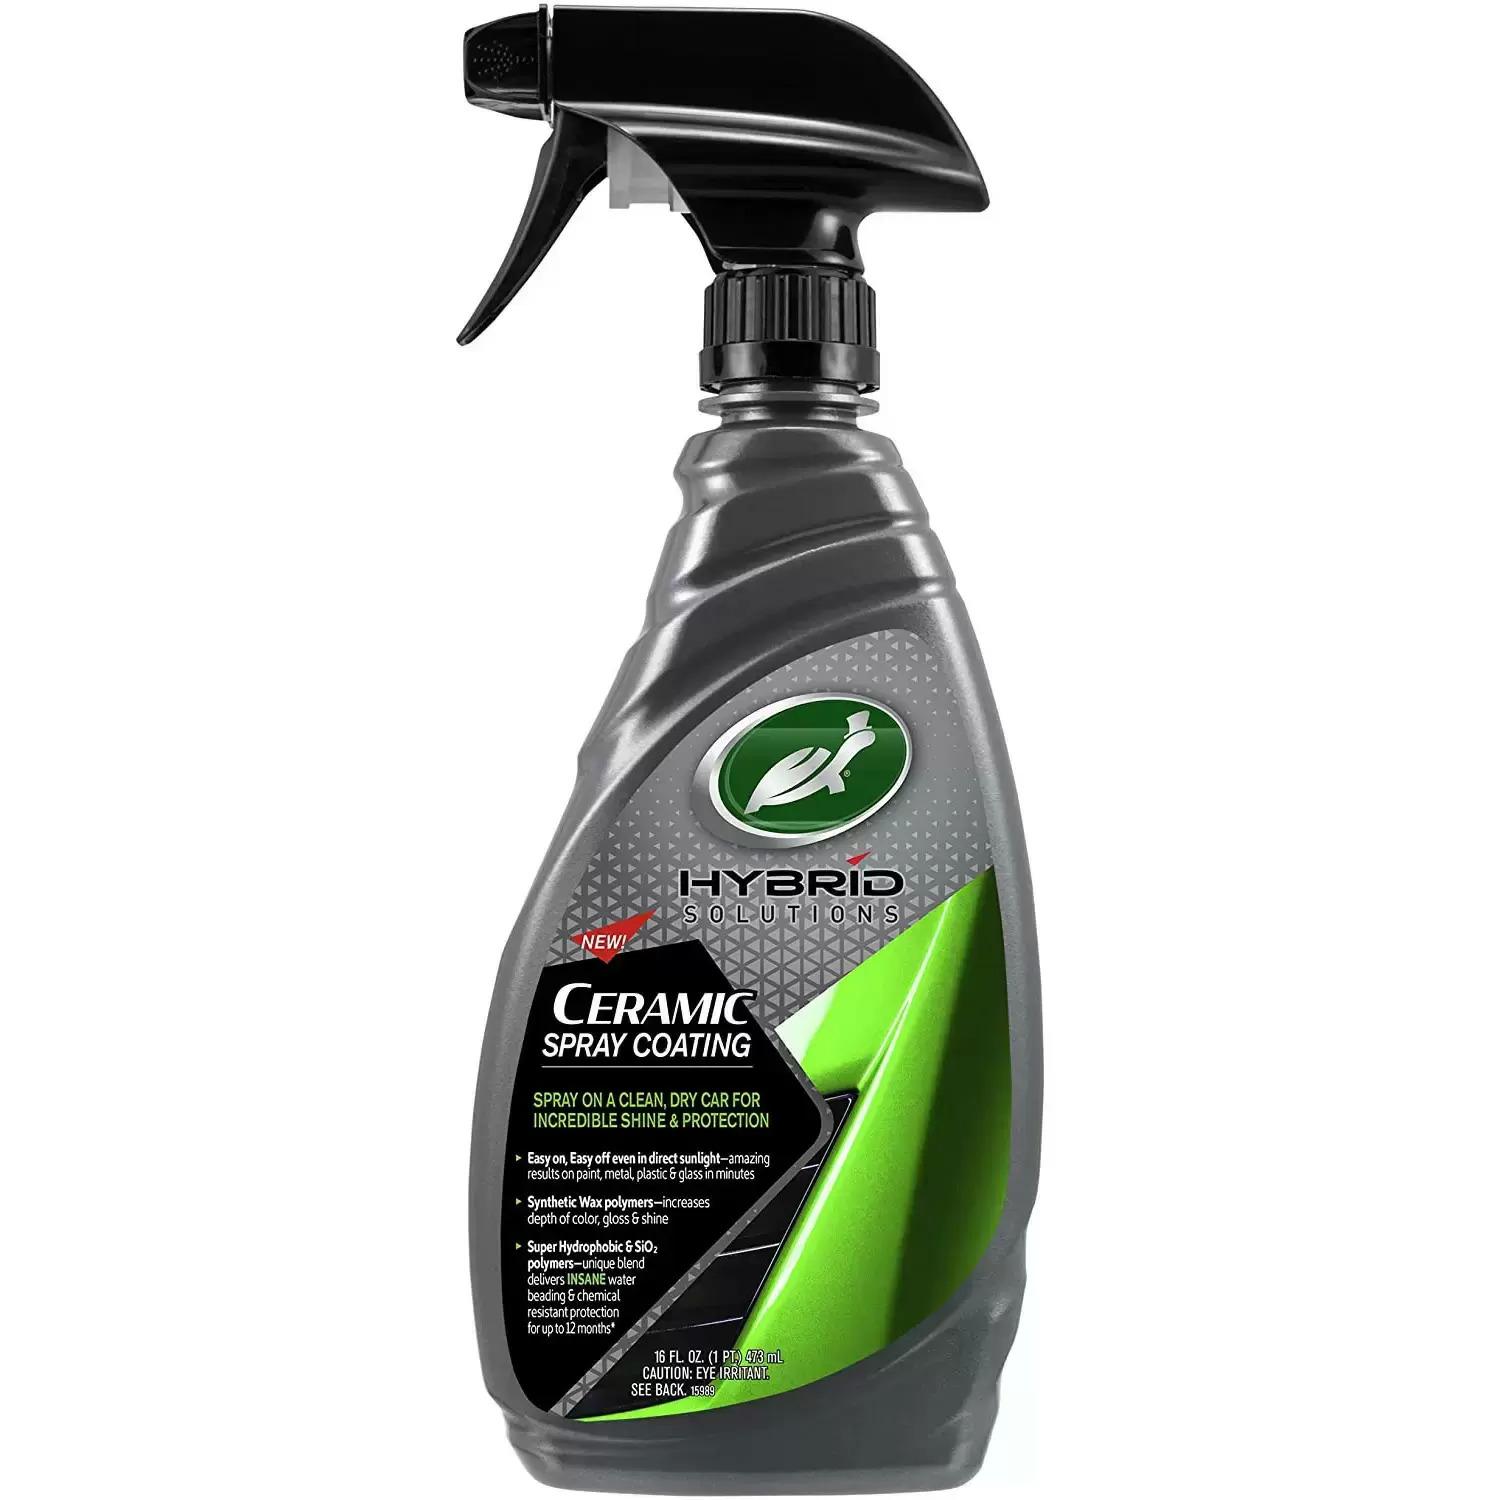 Turtle Wax 53409 Hybrid Solutions Ceramic Spray Coating for $12.97